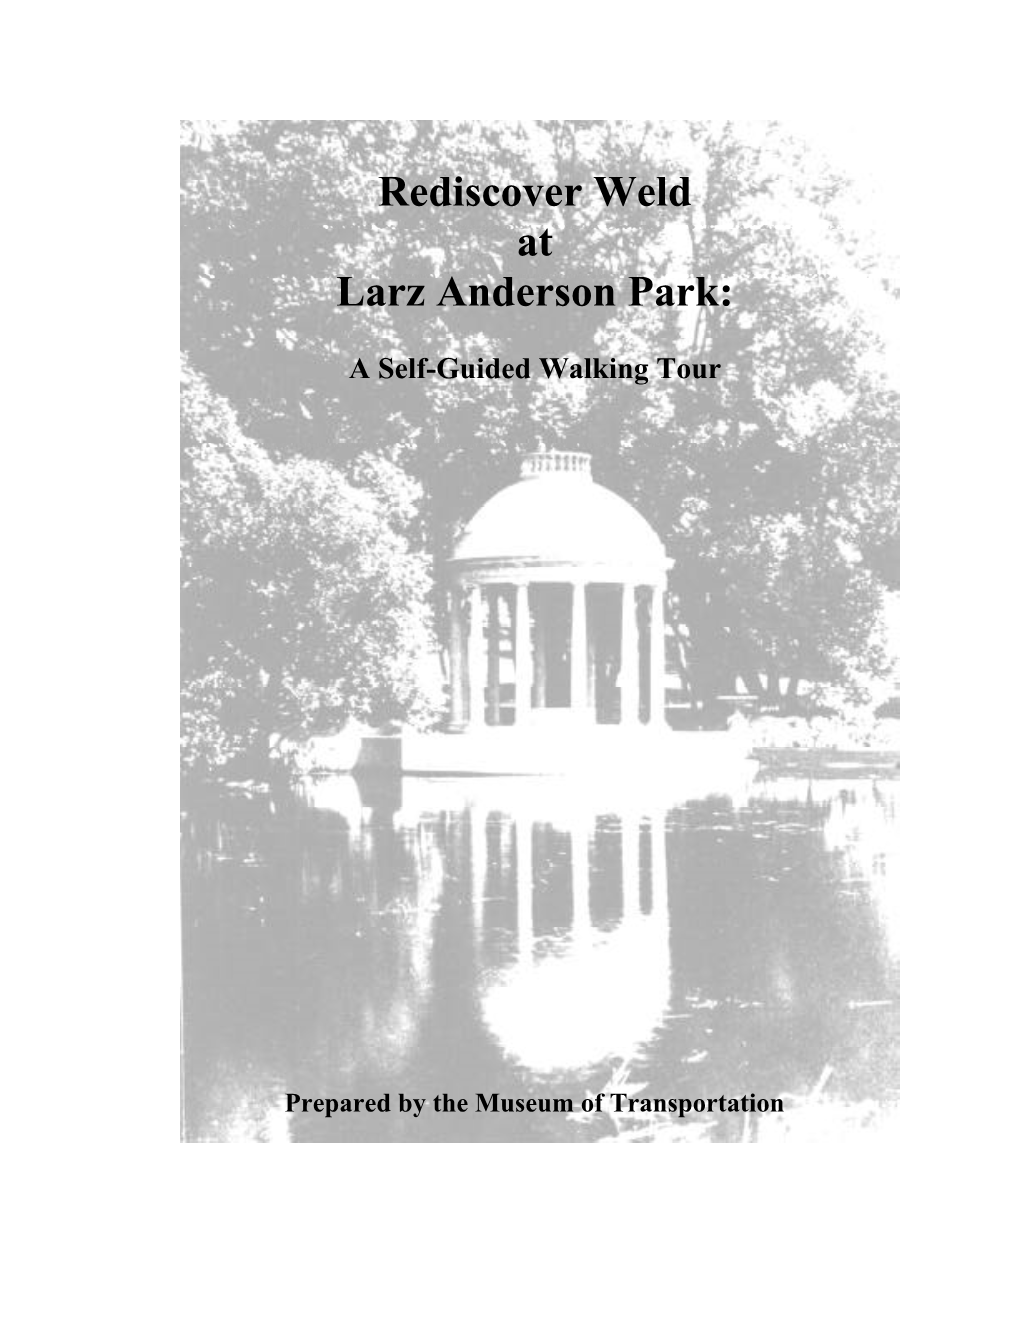 Rediscover Weld at Larz Anderson Park